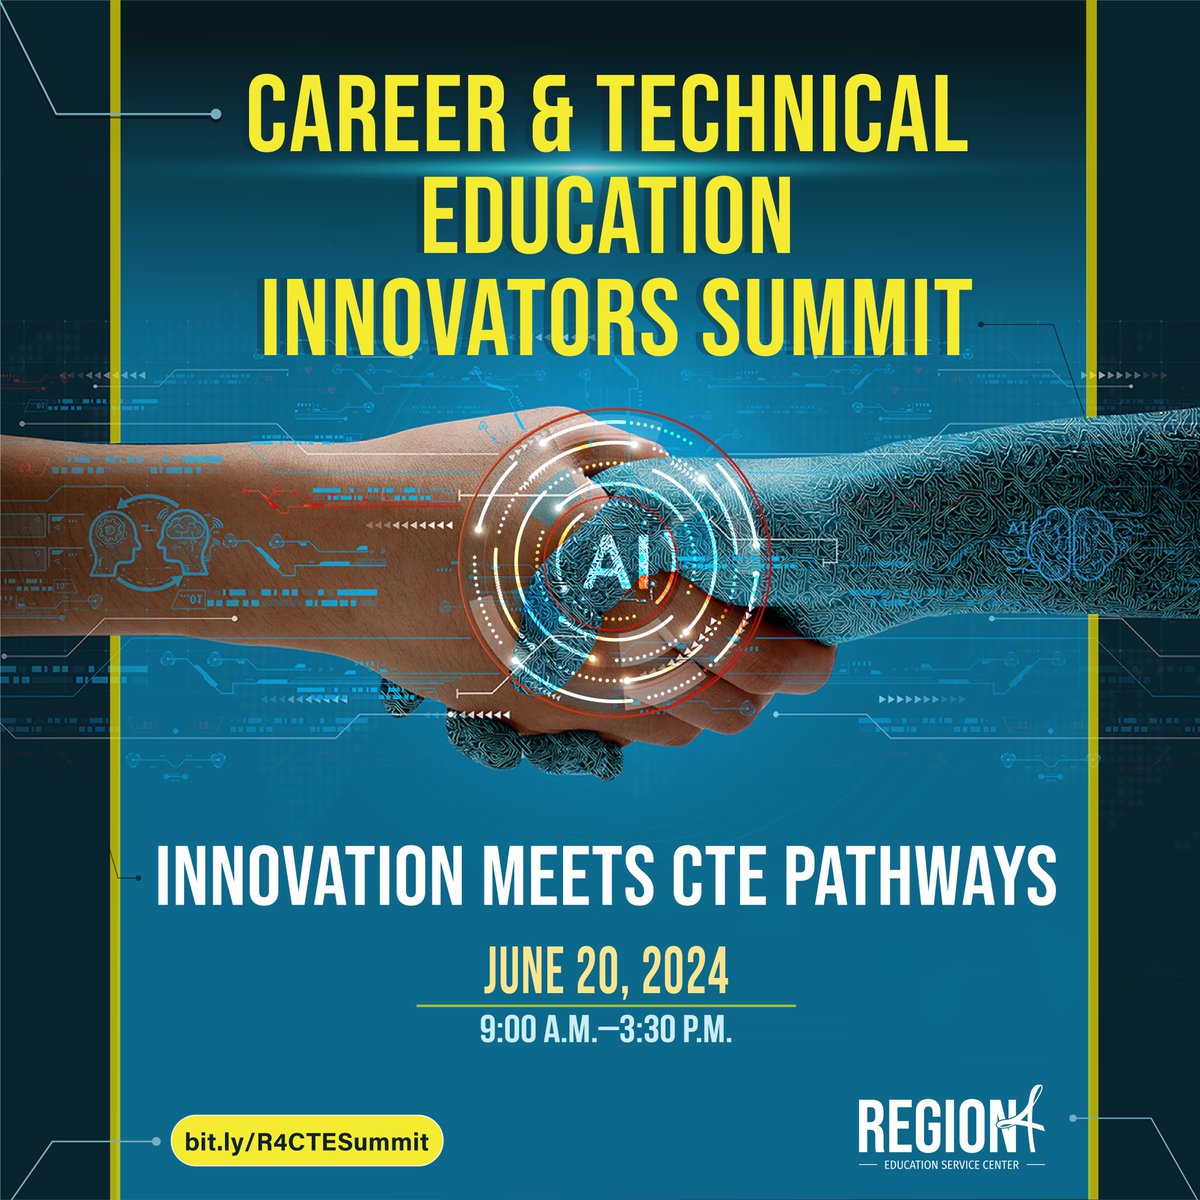 🚀 The CTE Revolution Starts Here 🚀 bit.ly/R4CTESummit Explore visionary strategies to reinvent CTE education and empower students for the workforce of the future! Join us on JUNE 20th and explore: ⚡ AI-Powered CTE Pathways 📊 Pioneering Industry Insights 💡 Dynamic…